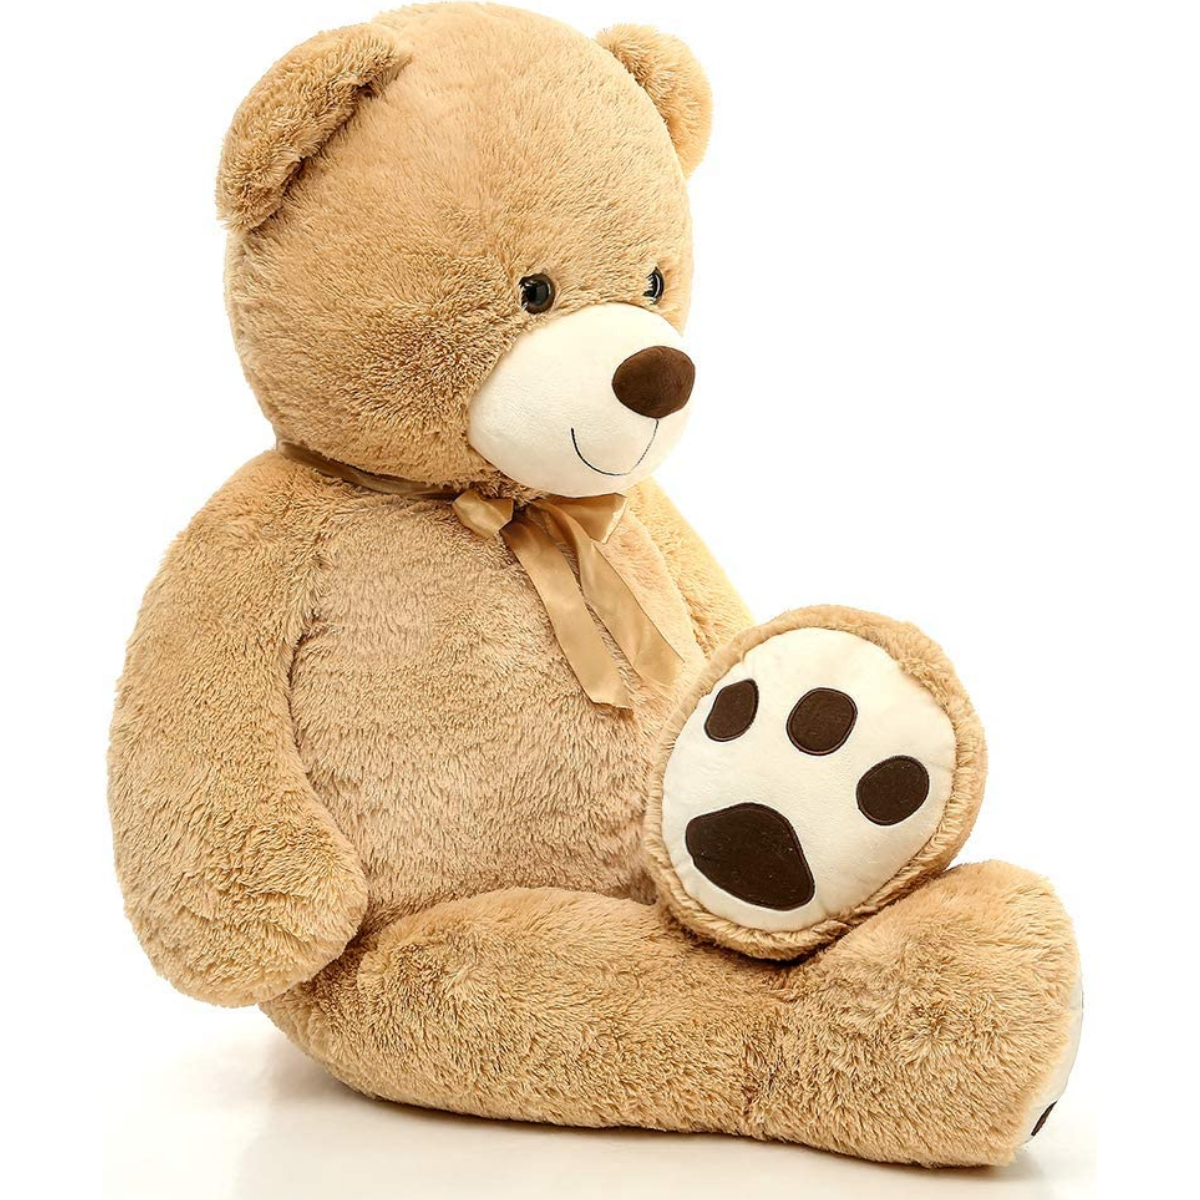 Adding a teddy bear can instantly up the cuteness factor and cozy feel in any room. Just look at this huge brown-colored teddy bear! It fits in easily with any decorative theme. Our teddy bear is packed with a soft and snuggly plushy material and filled with PP cotton. It's incredibly soft and perfect for cuddling with! Ideal present for your loved ones, be it family, friends, or the adorable little ones.